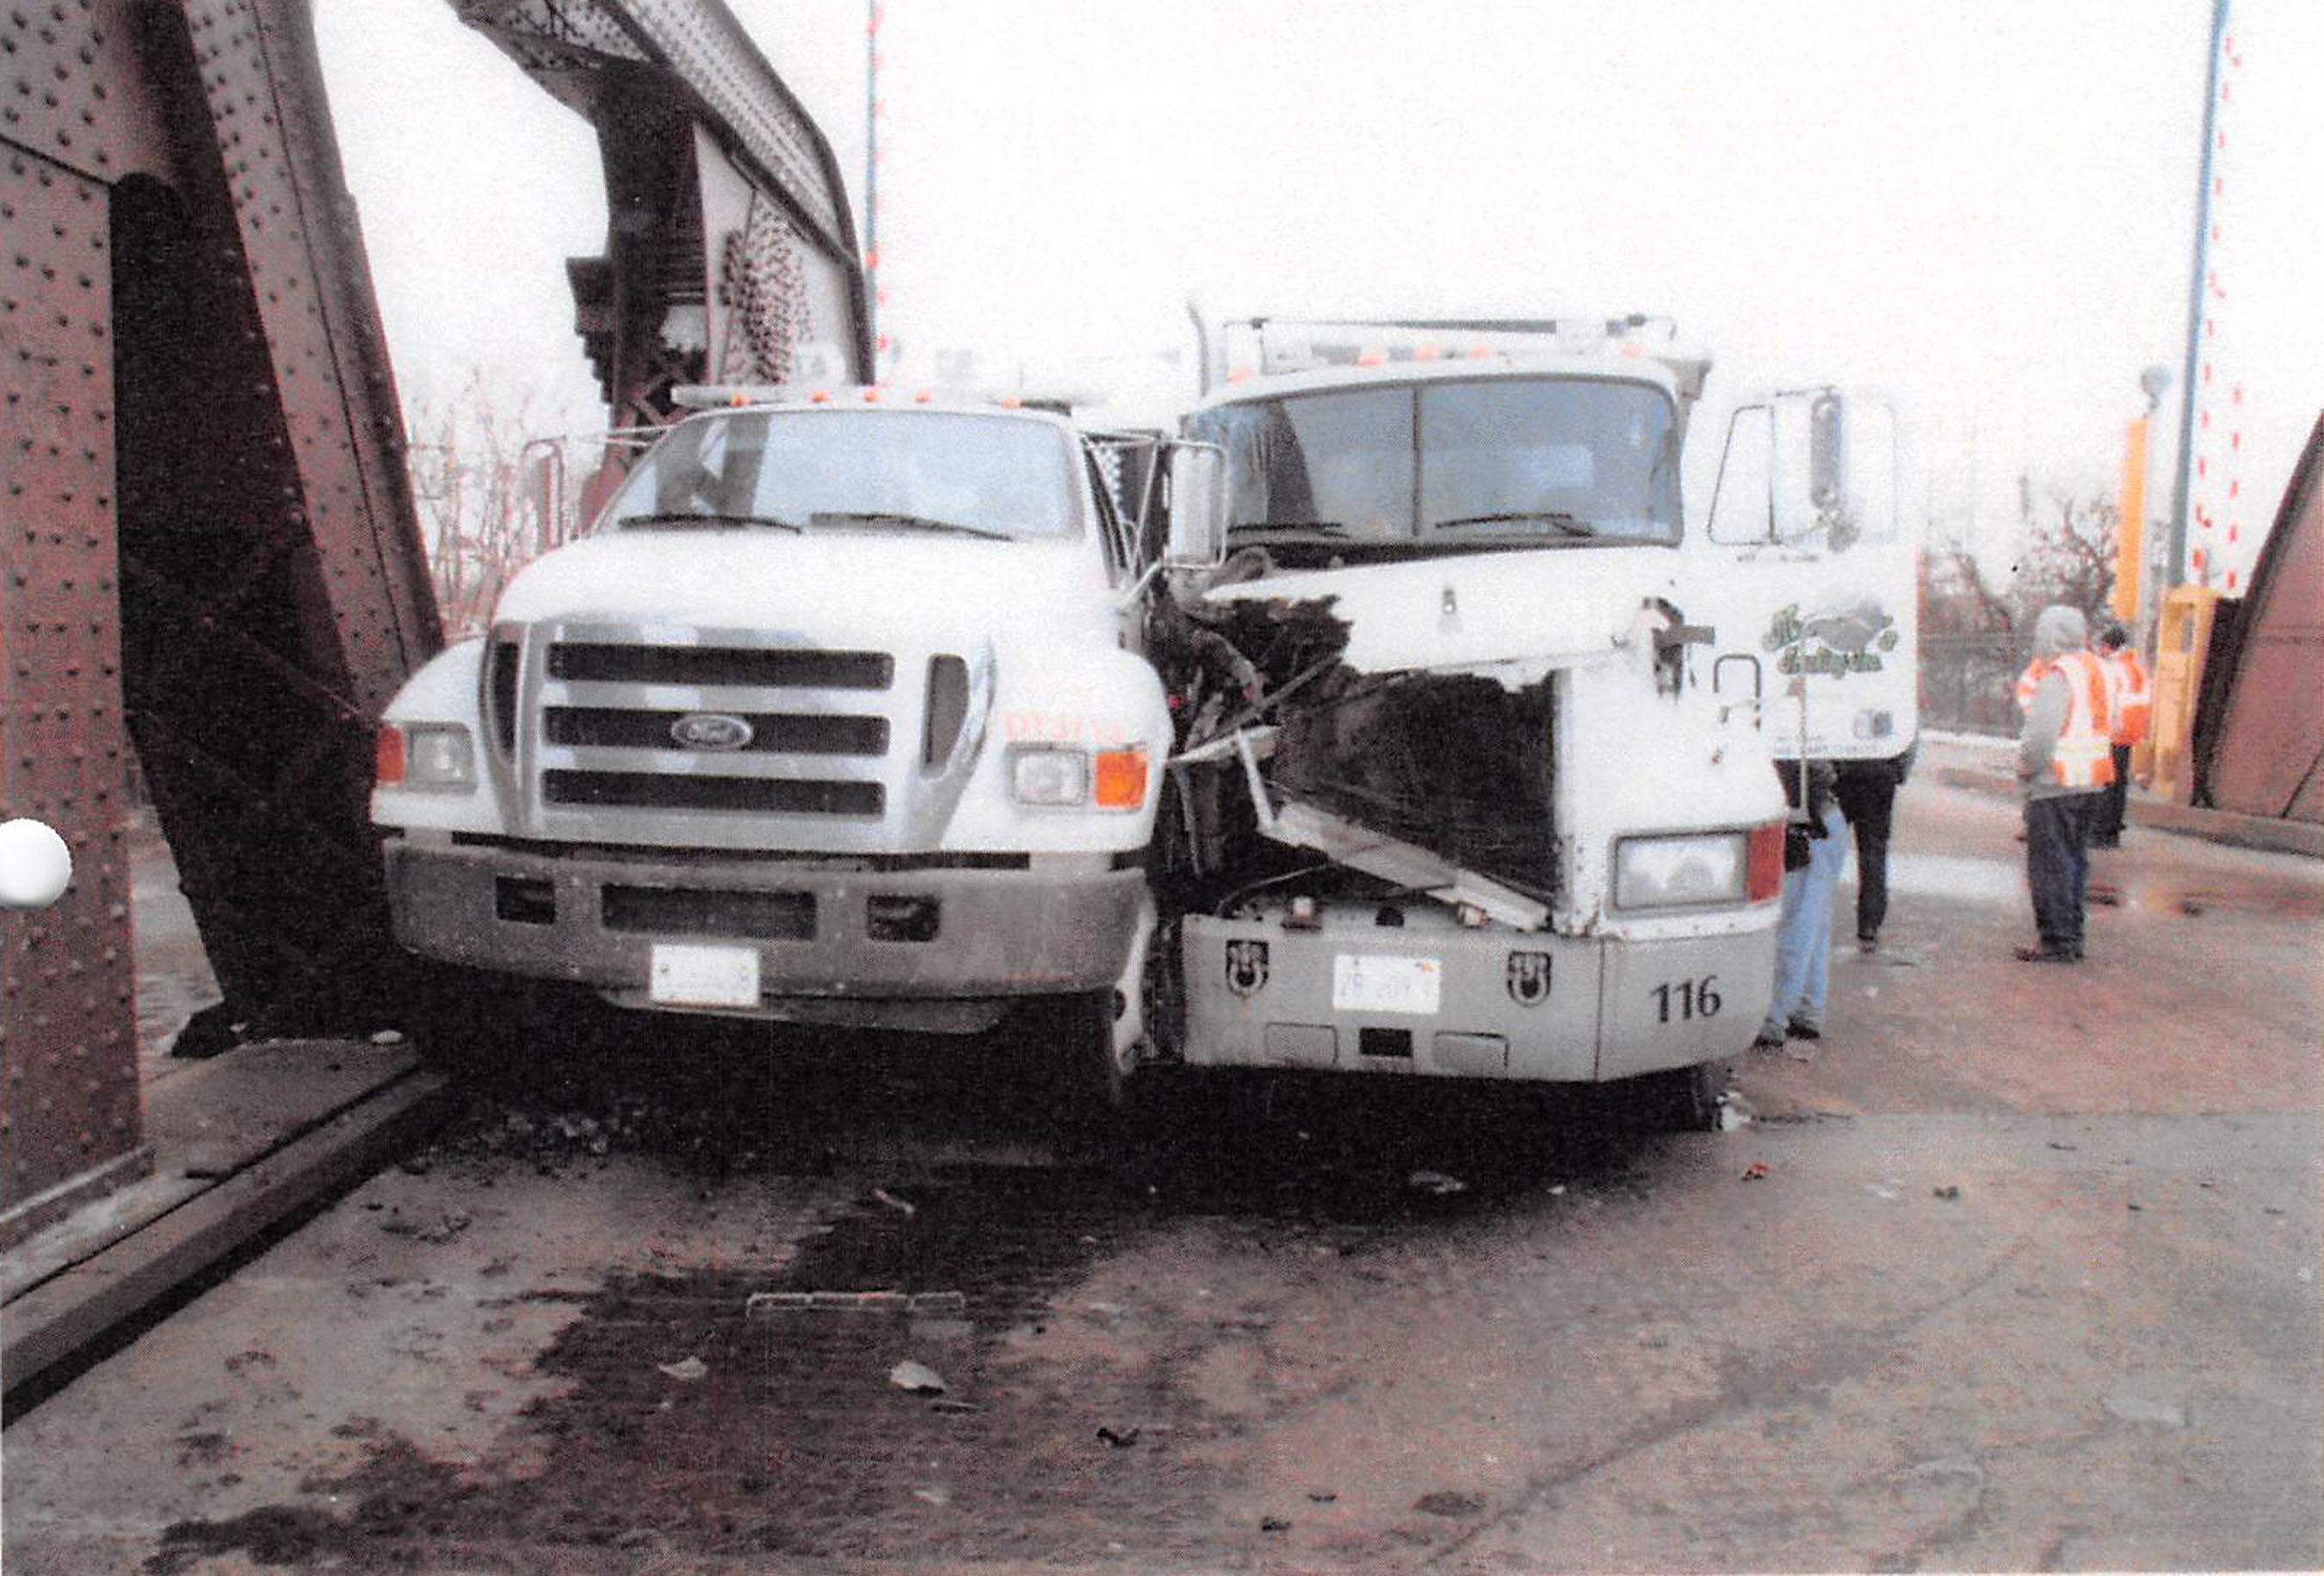 Deadly accident scene on 100th St. Bridge in Chicago. The family of the city worker killed in the accident received a $7.5 million jury award in the case that followed. (PRNewsFoto/Tomasik Kotin Kasserman, LLC)